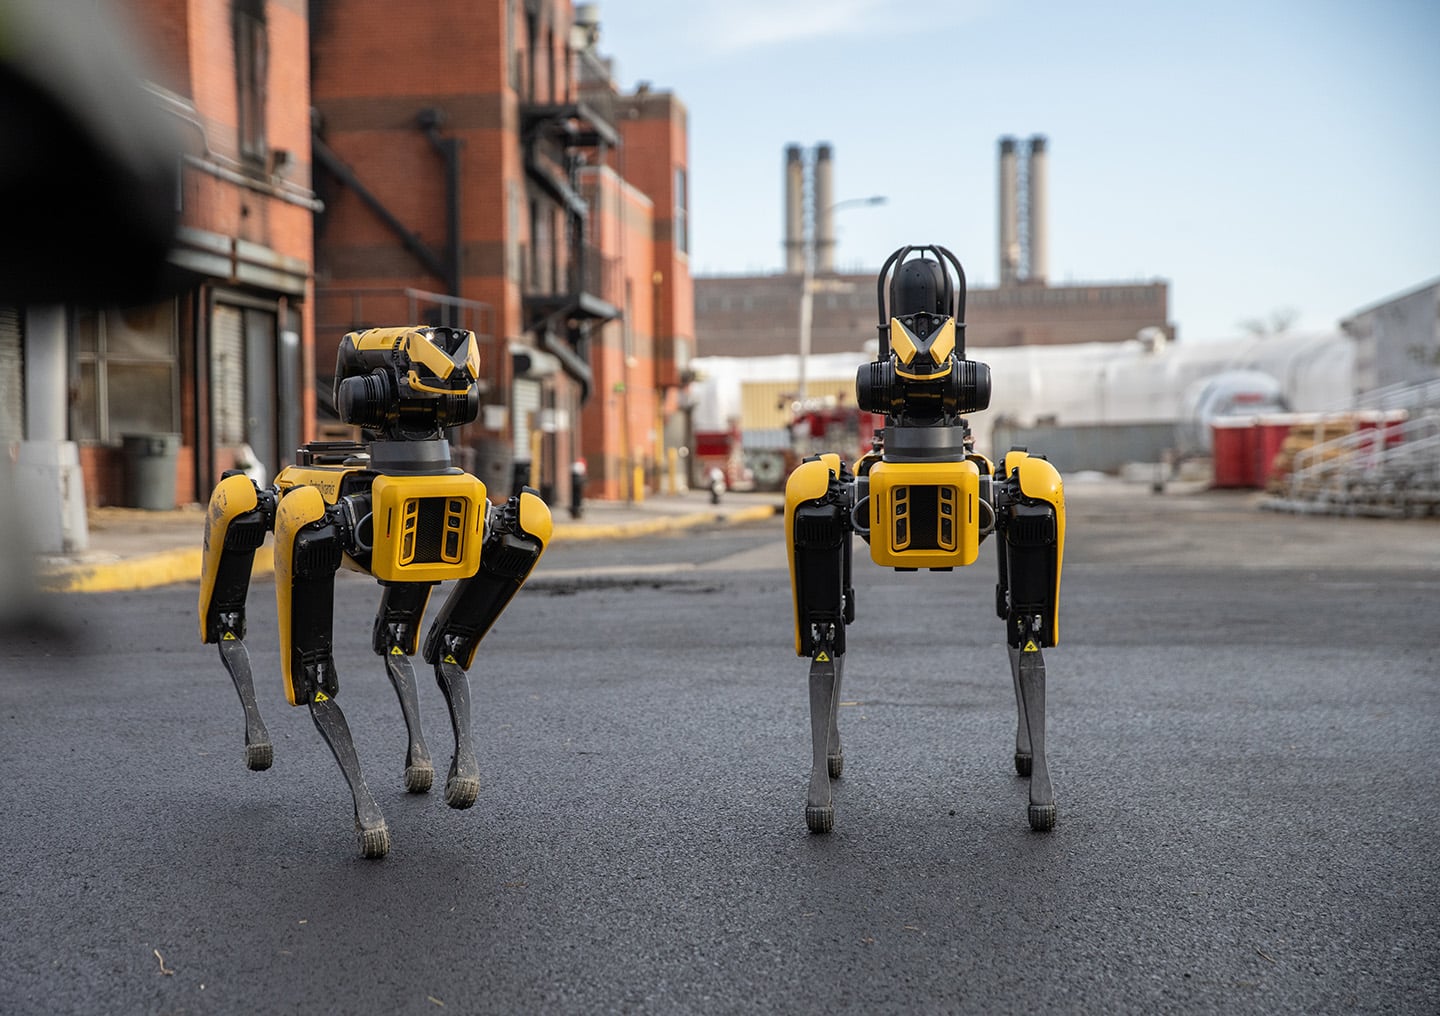 Two Spot robots with Arms in an urban environment